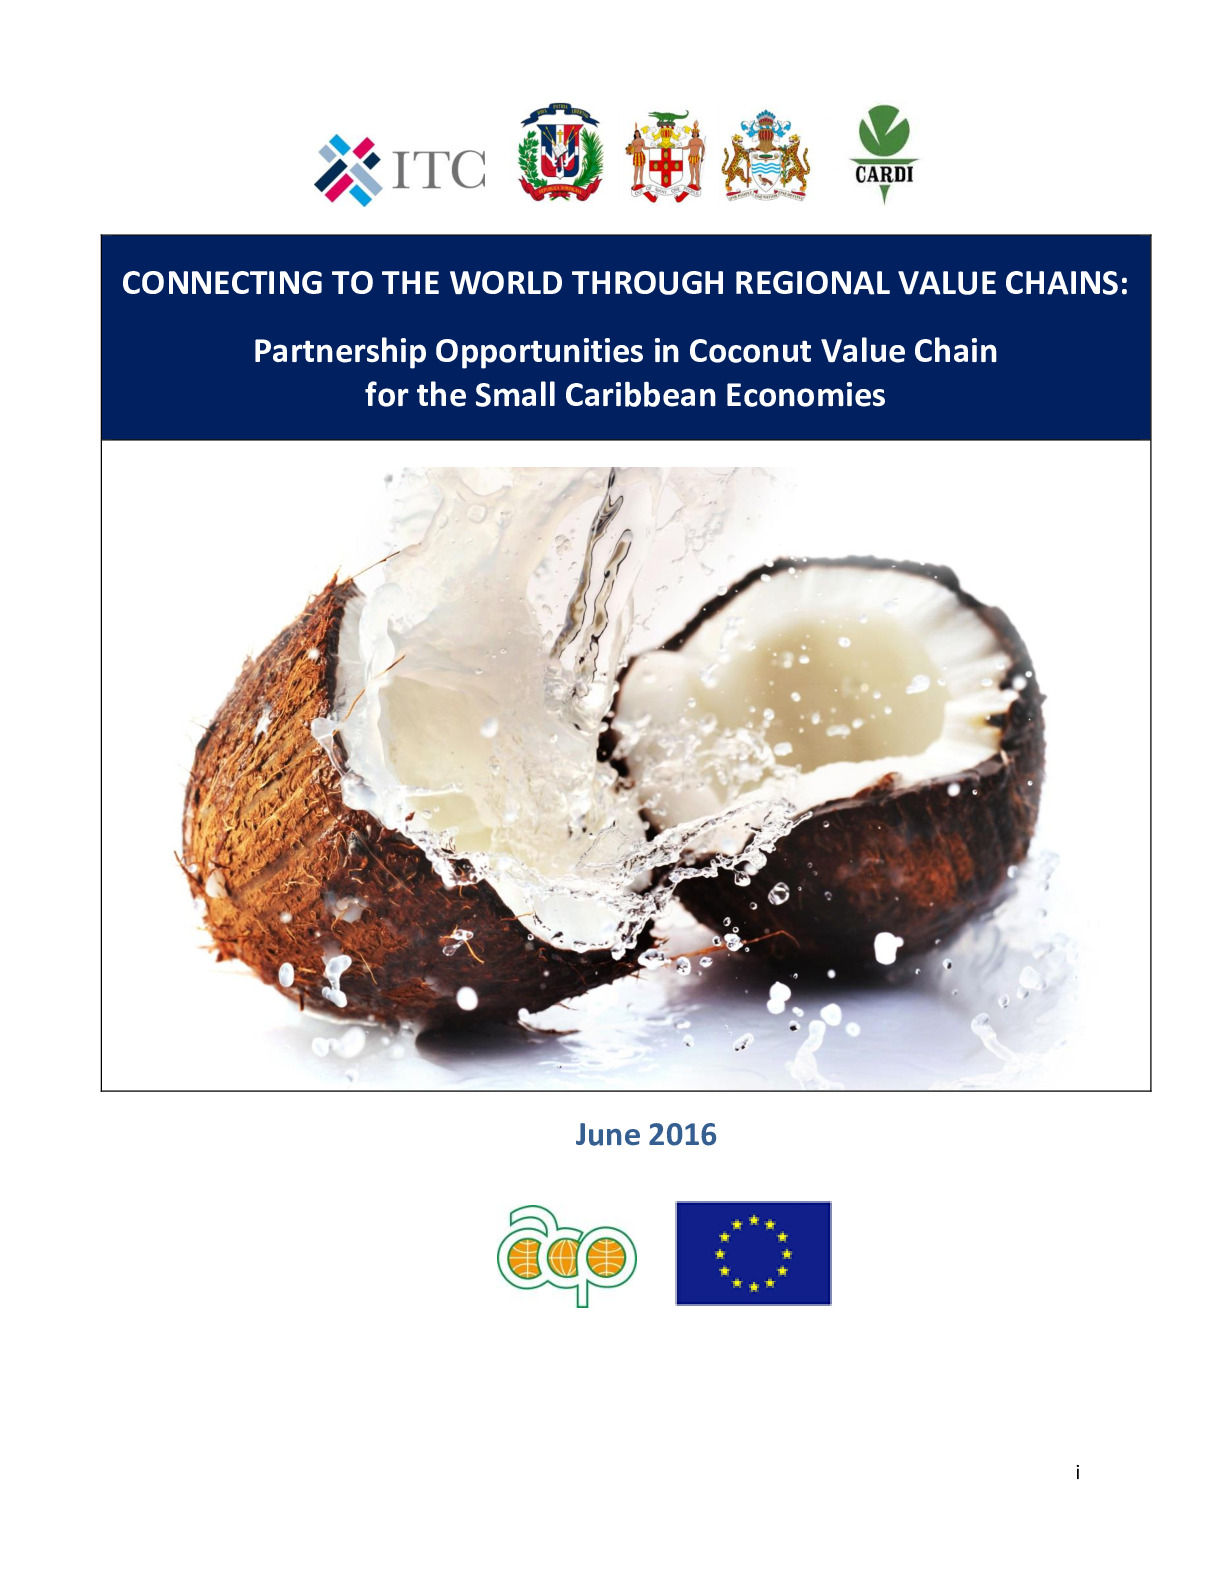 2._connecting-to-world-through-regional-value-chains-partnership-opportunities-coconut-value-chain-small-cbbean